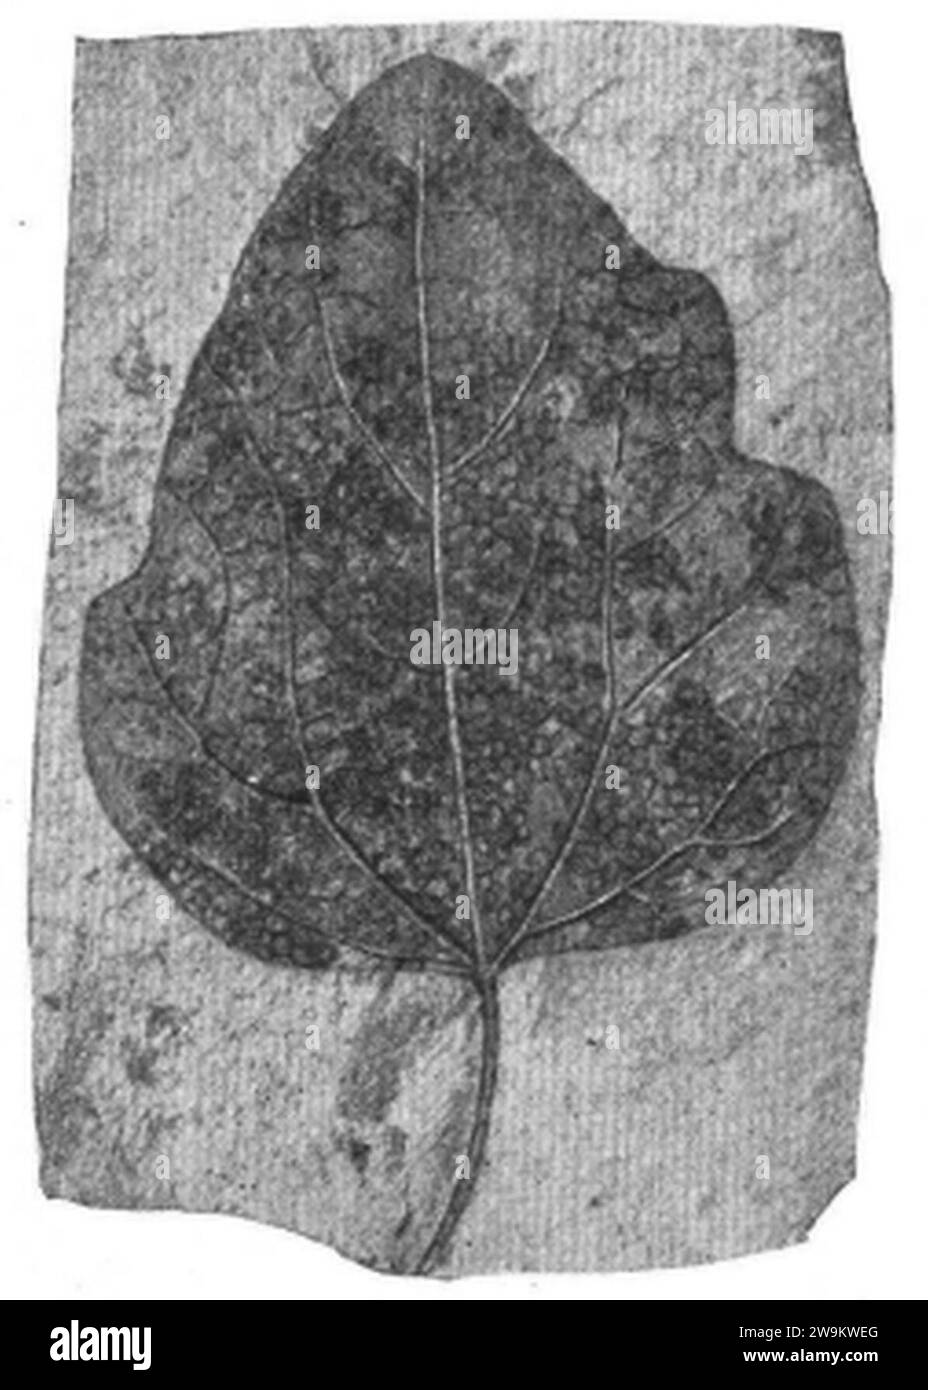 Zizyphoides auriculata as Populus heteromorpha USNM P36922 Plate15 Fig4. Stock Photo